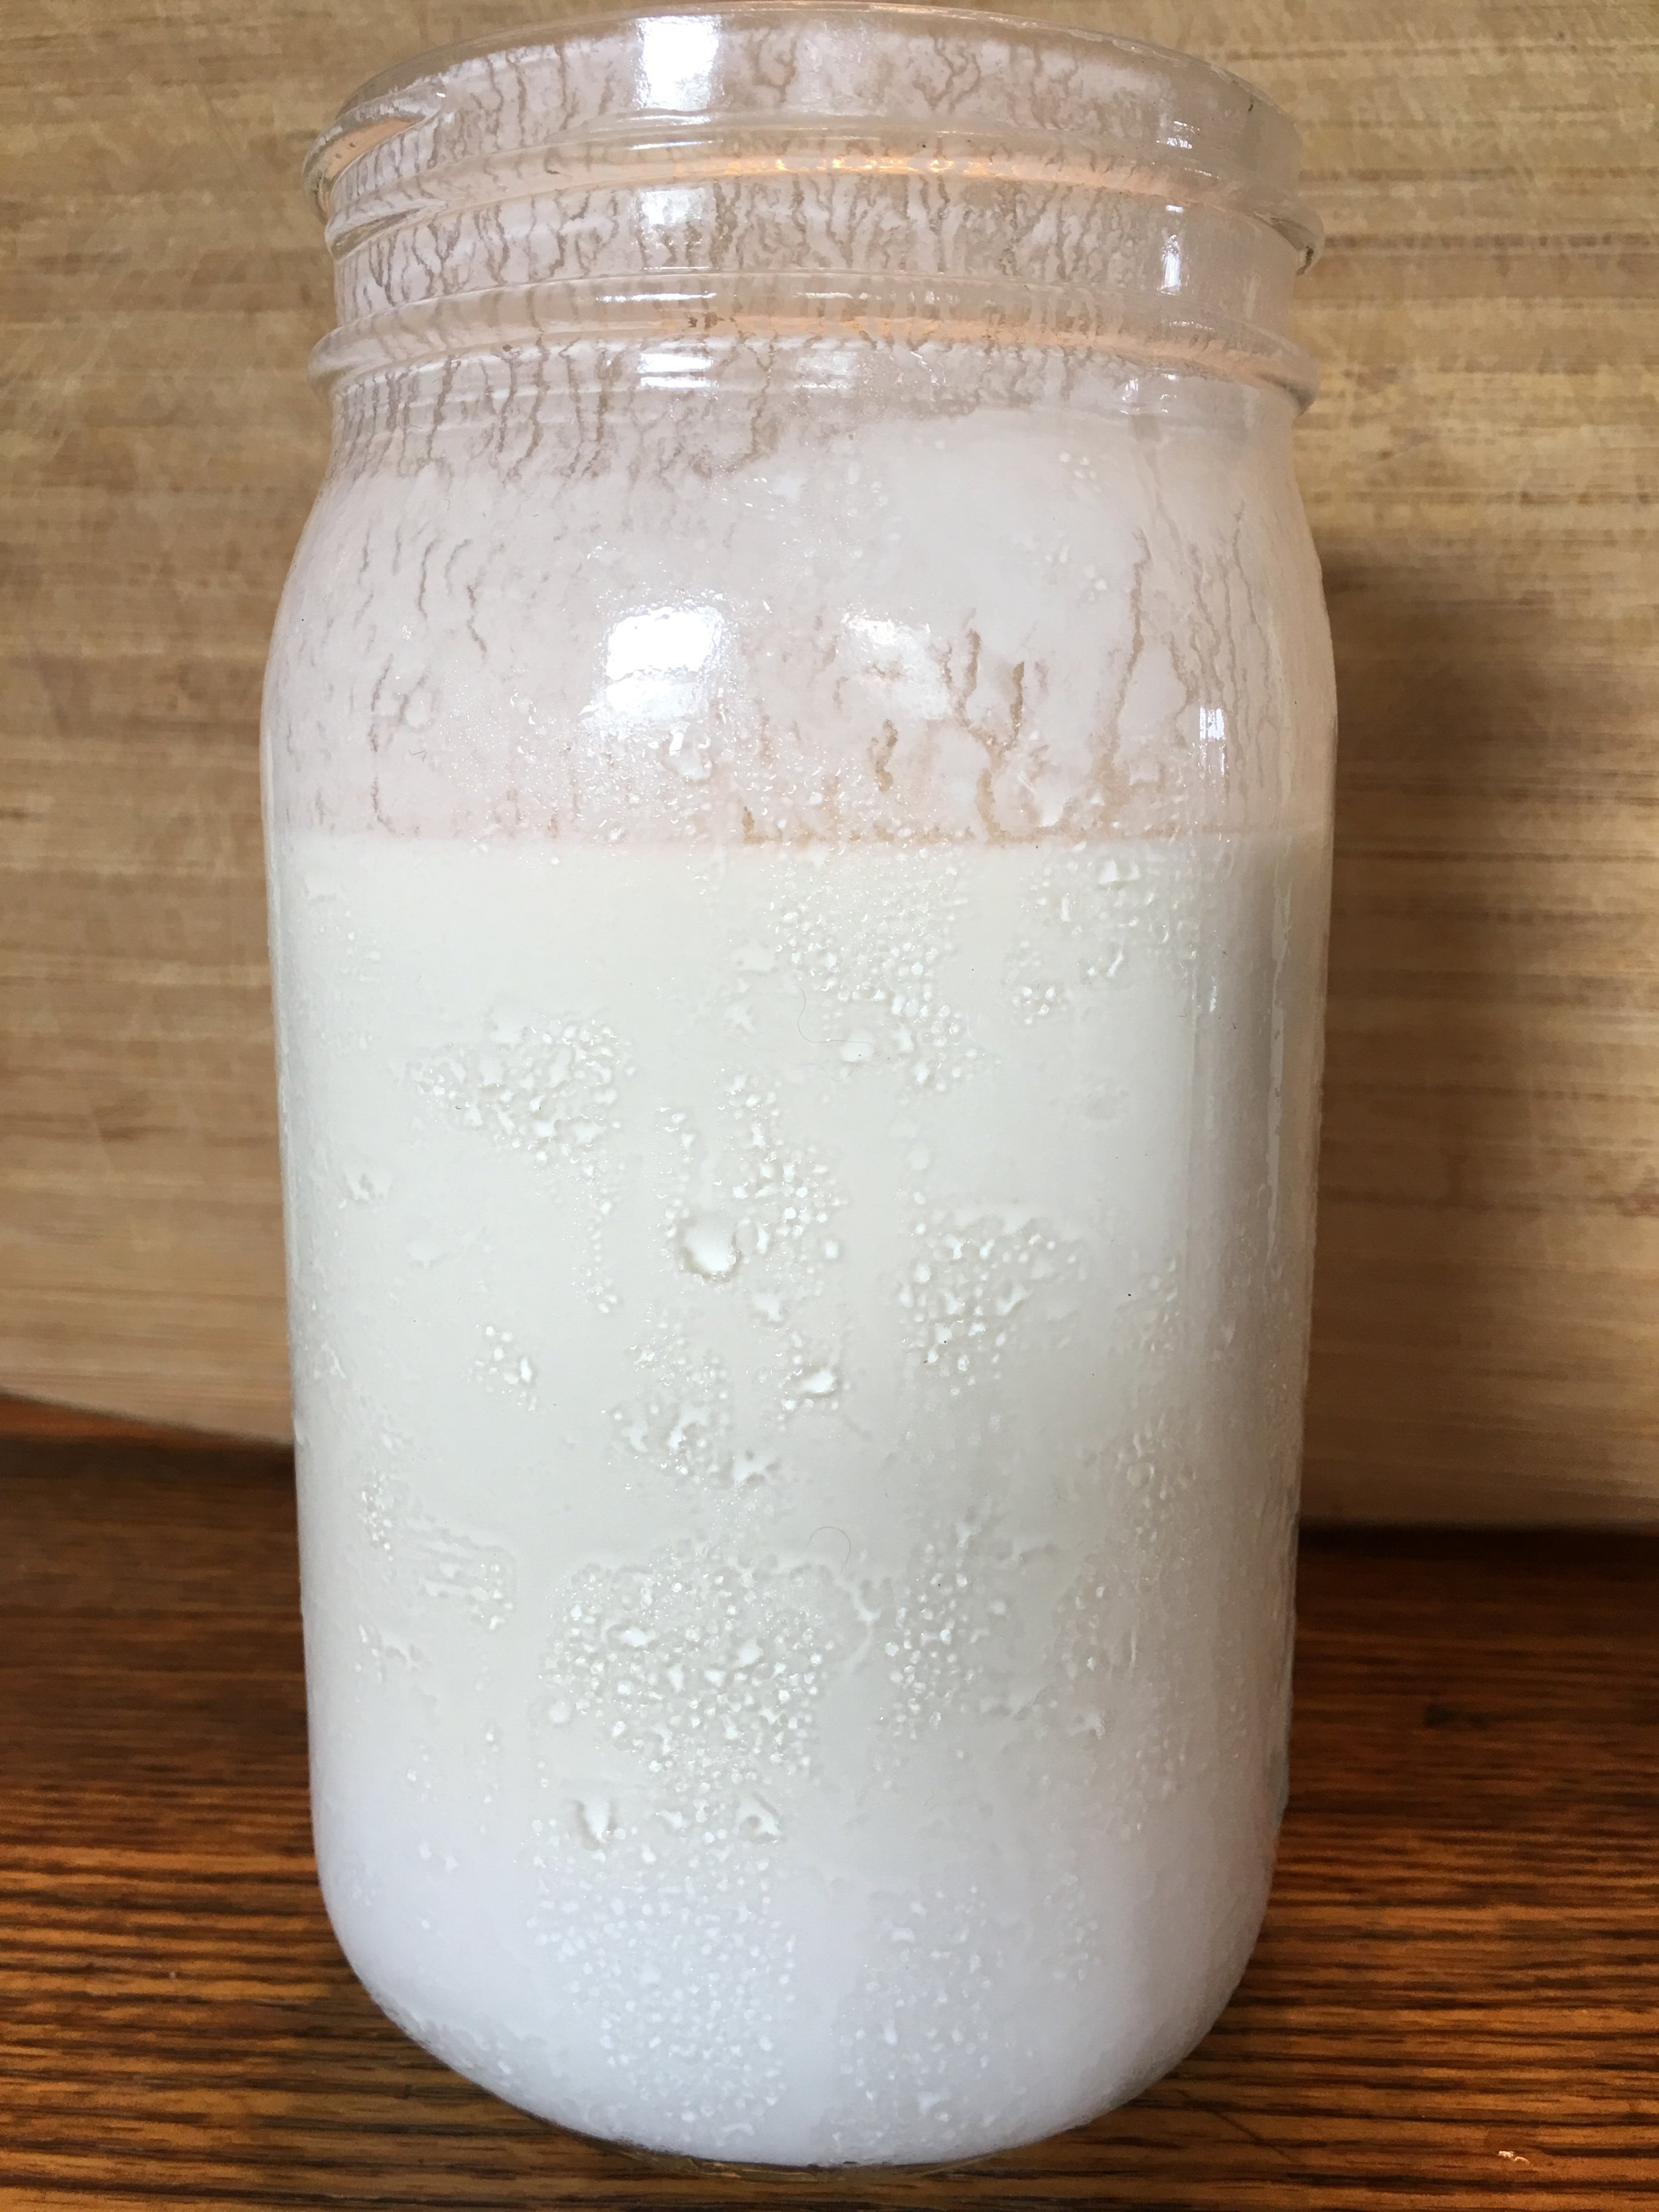 ULTIMATE Milk Kefir Guide (how to make it, troubleshooting tips